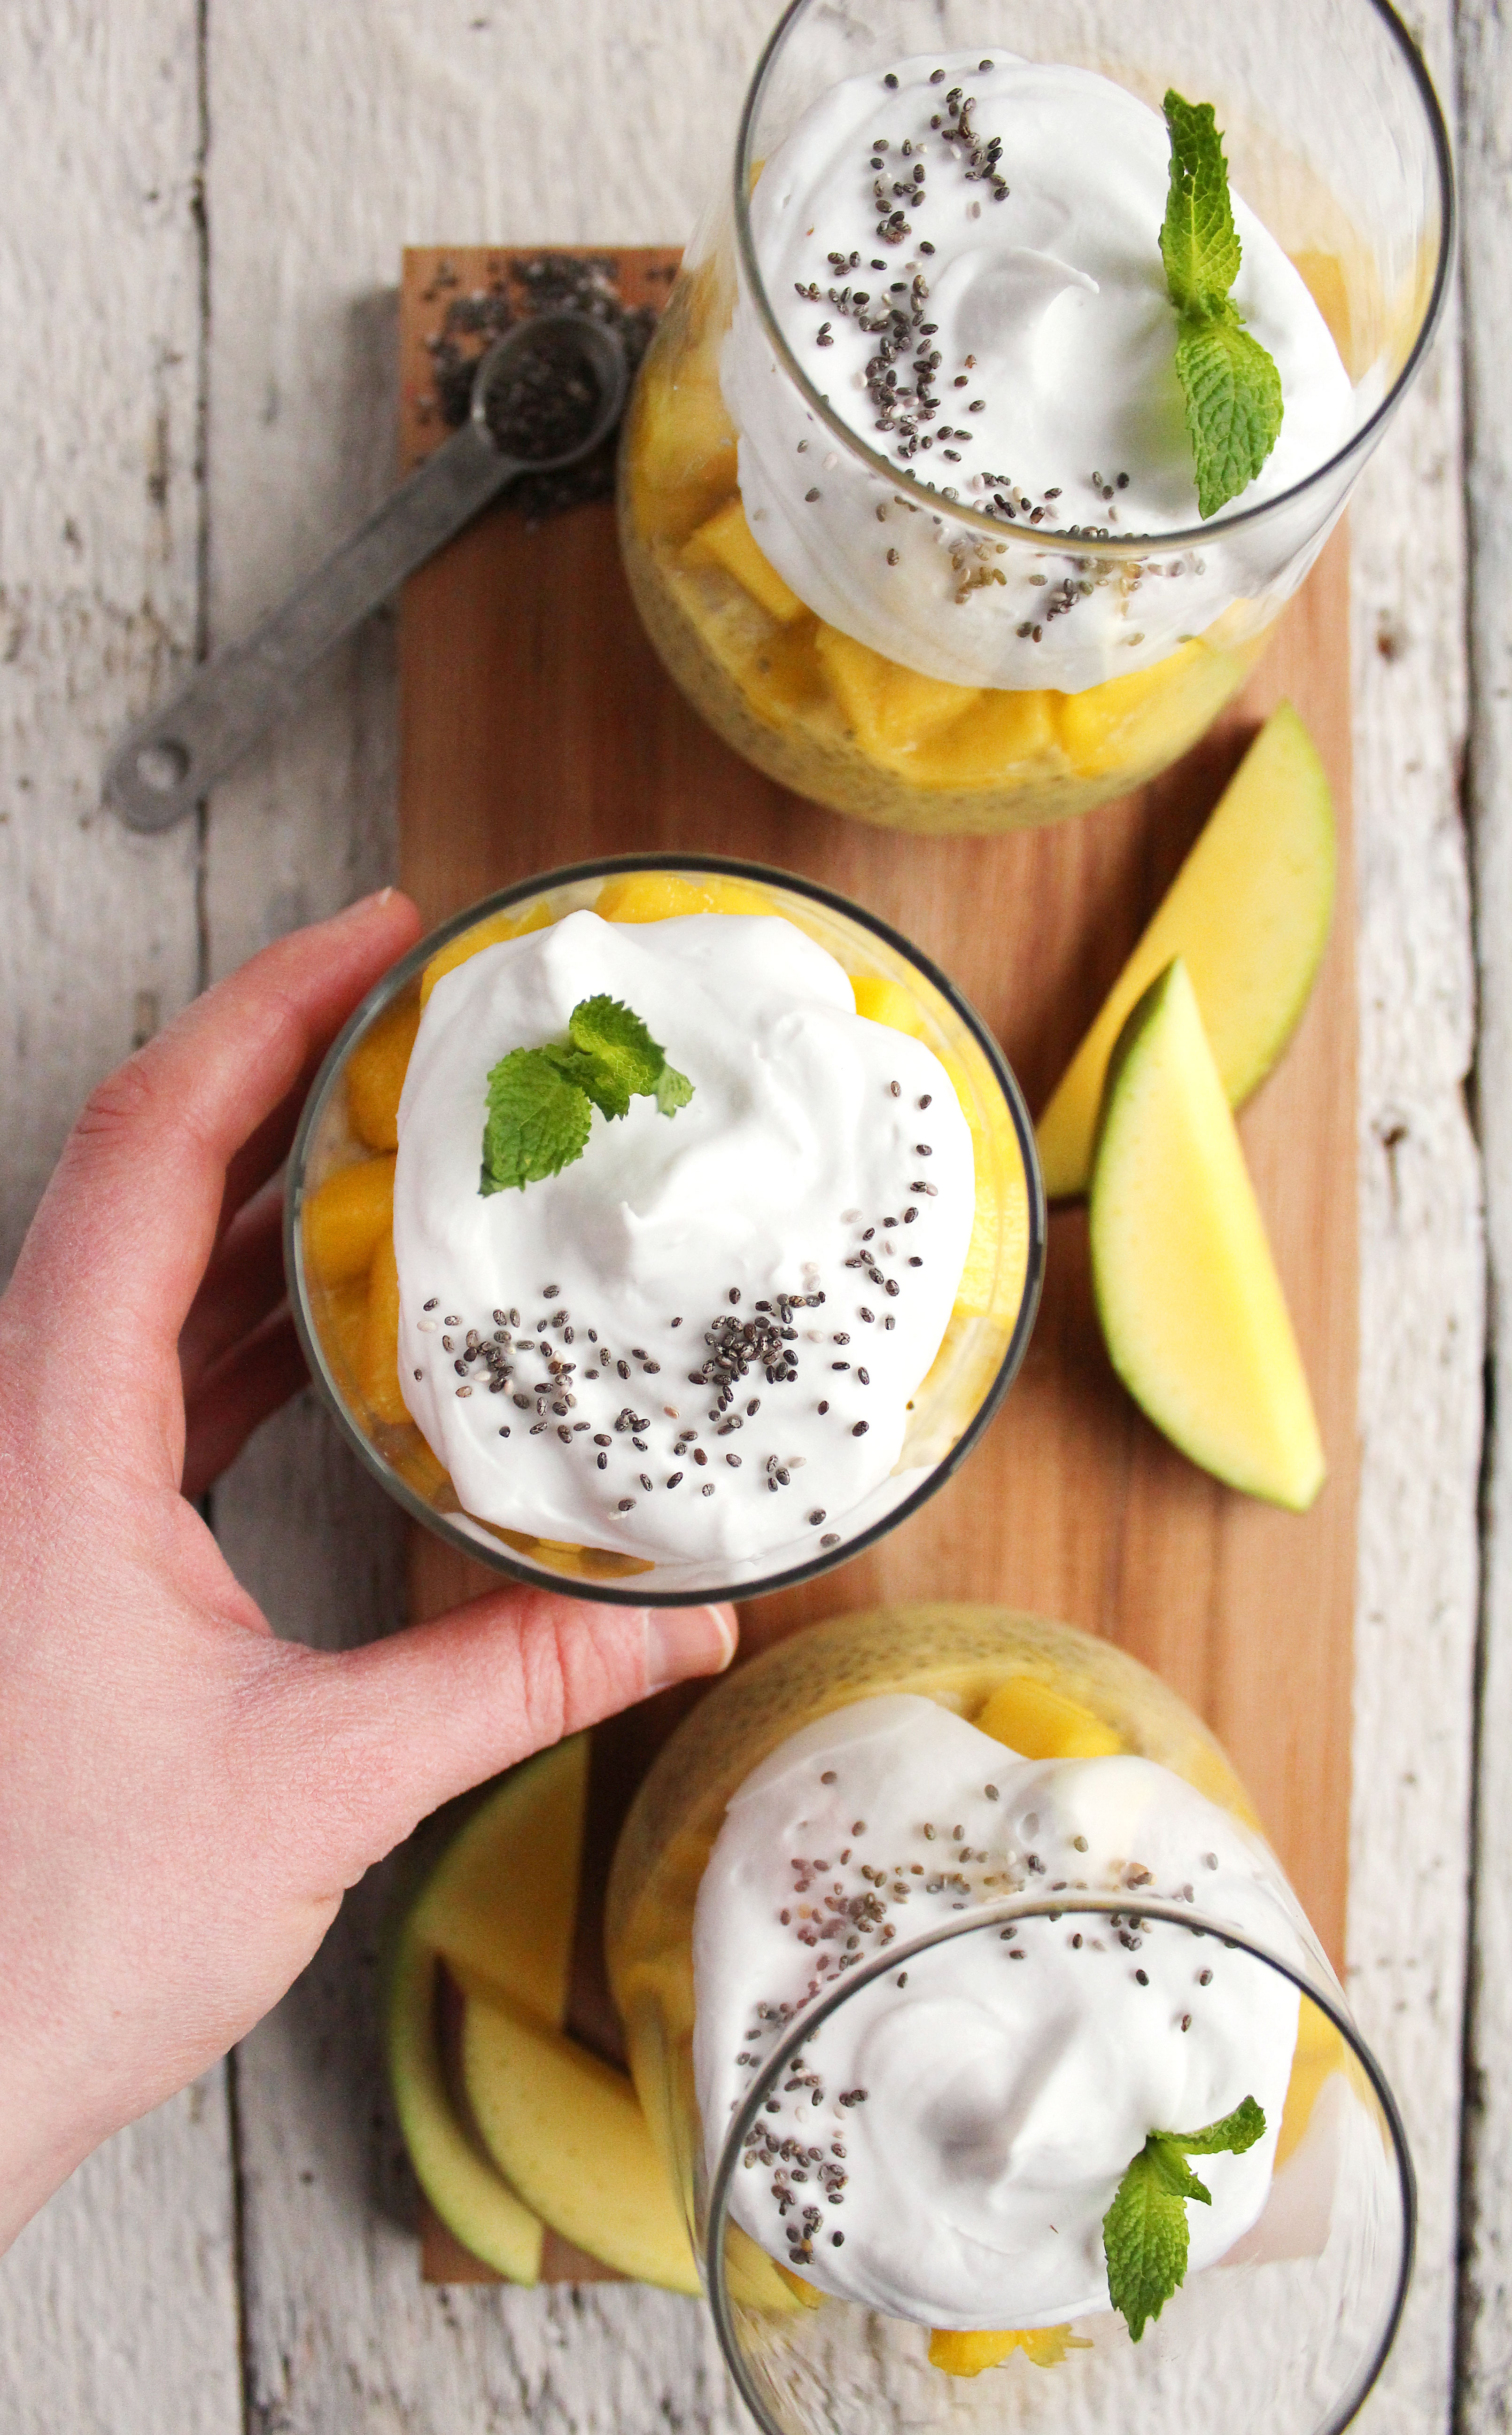 EASY Mango Chia Pudding! Naturally sweetened, SUPER creamy + topped with pillowy coconut whipped cream! YUM! #vegan #glutenfree #recipe | Peach and the Cobbler